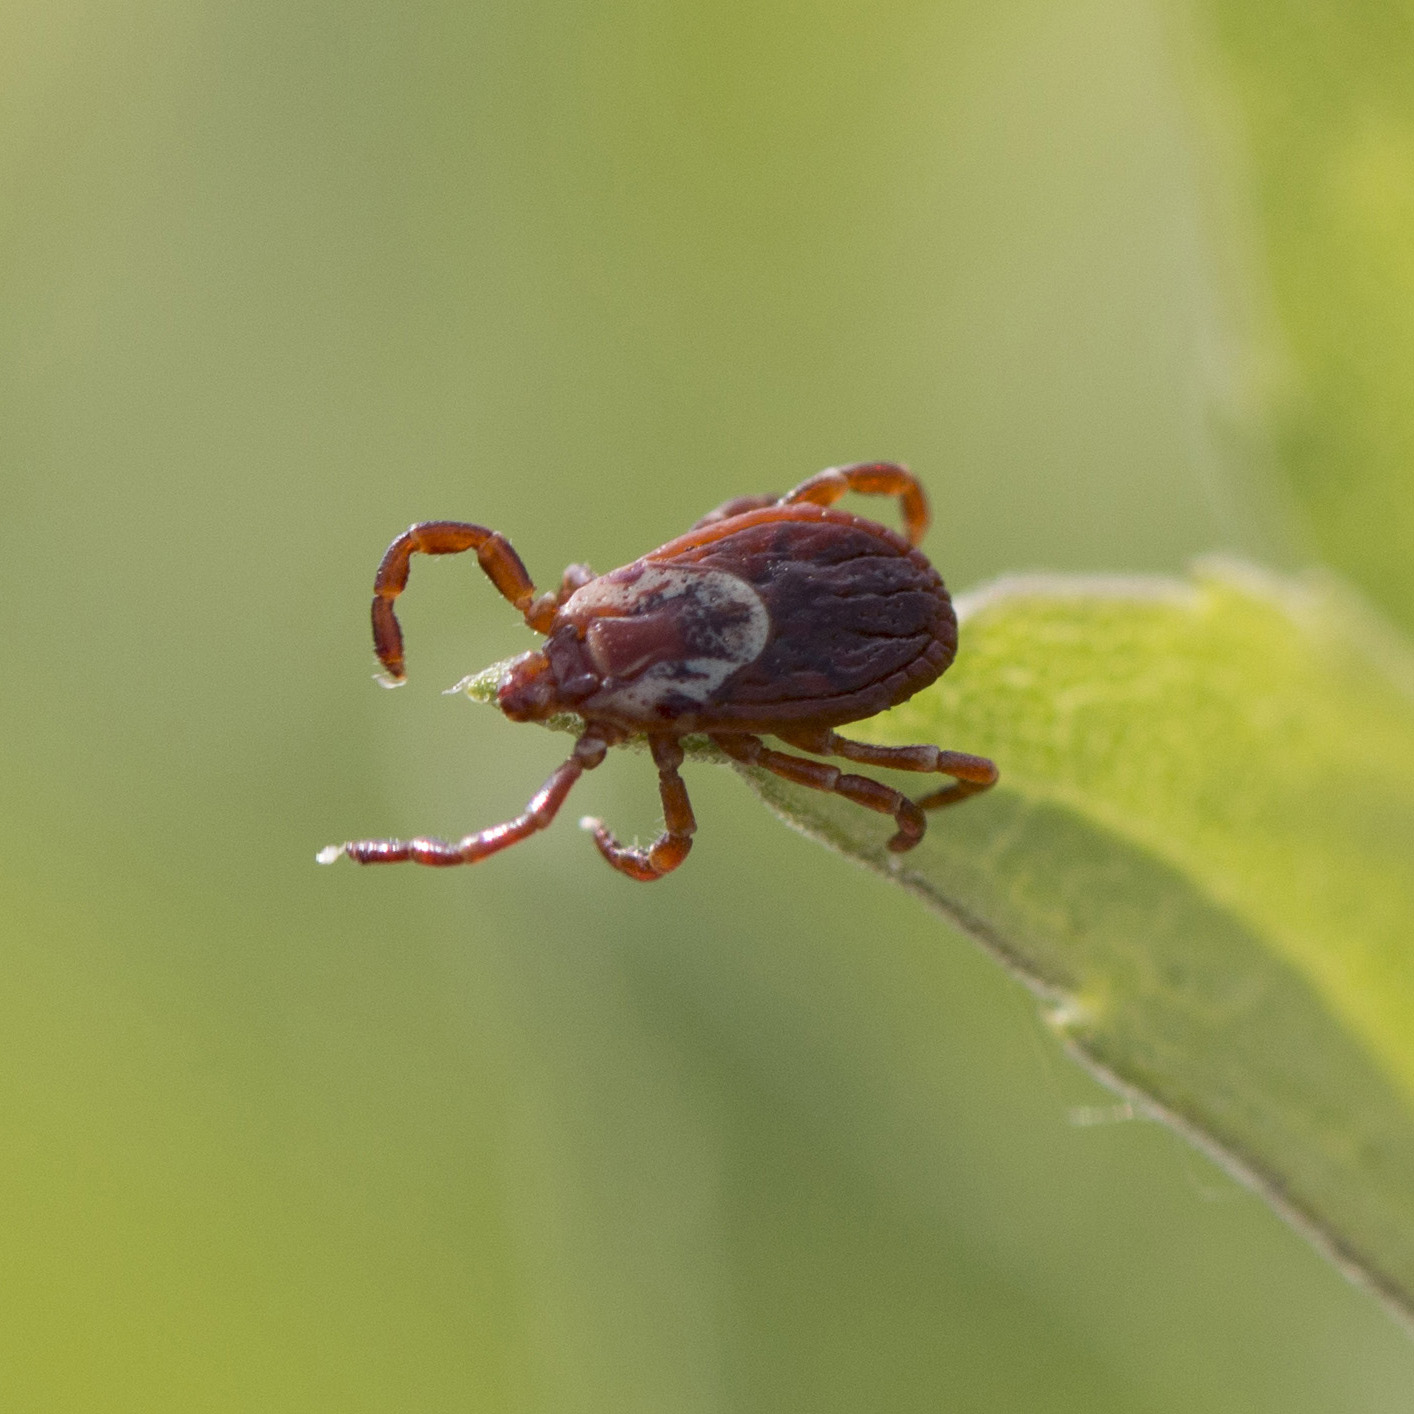 Tick on the end of a leaf